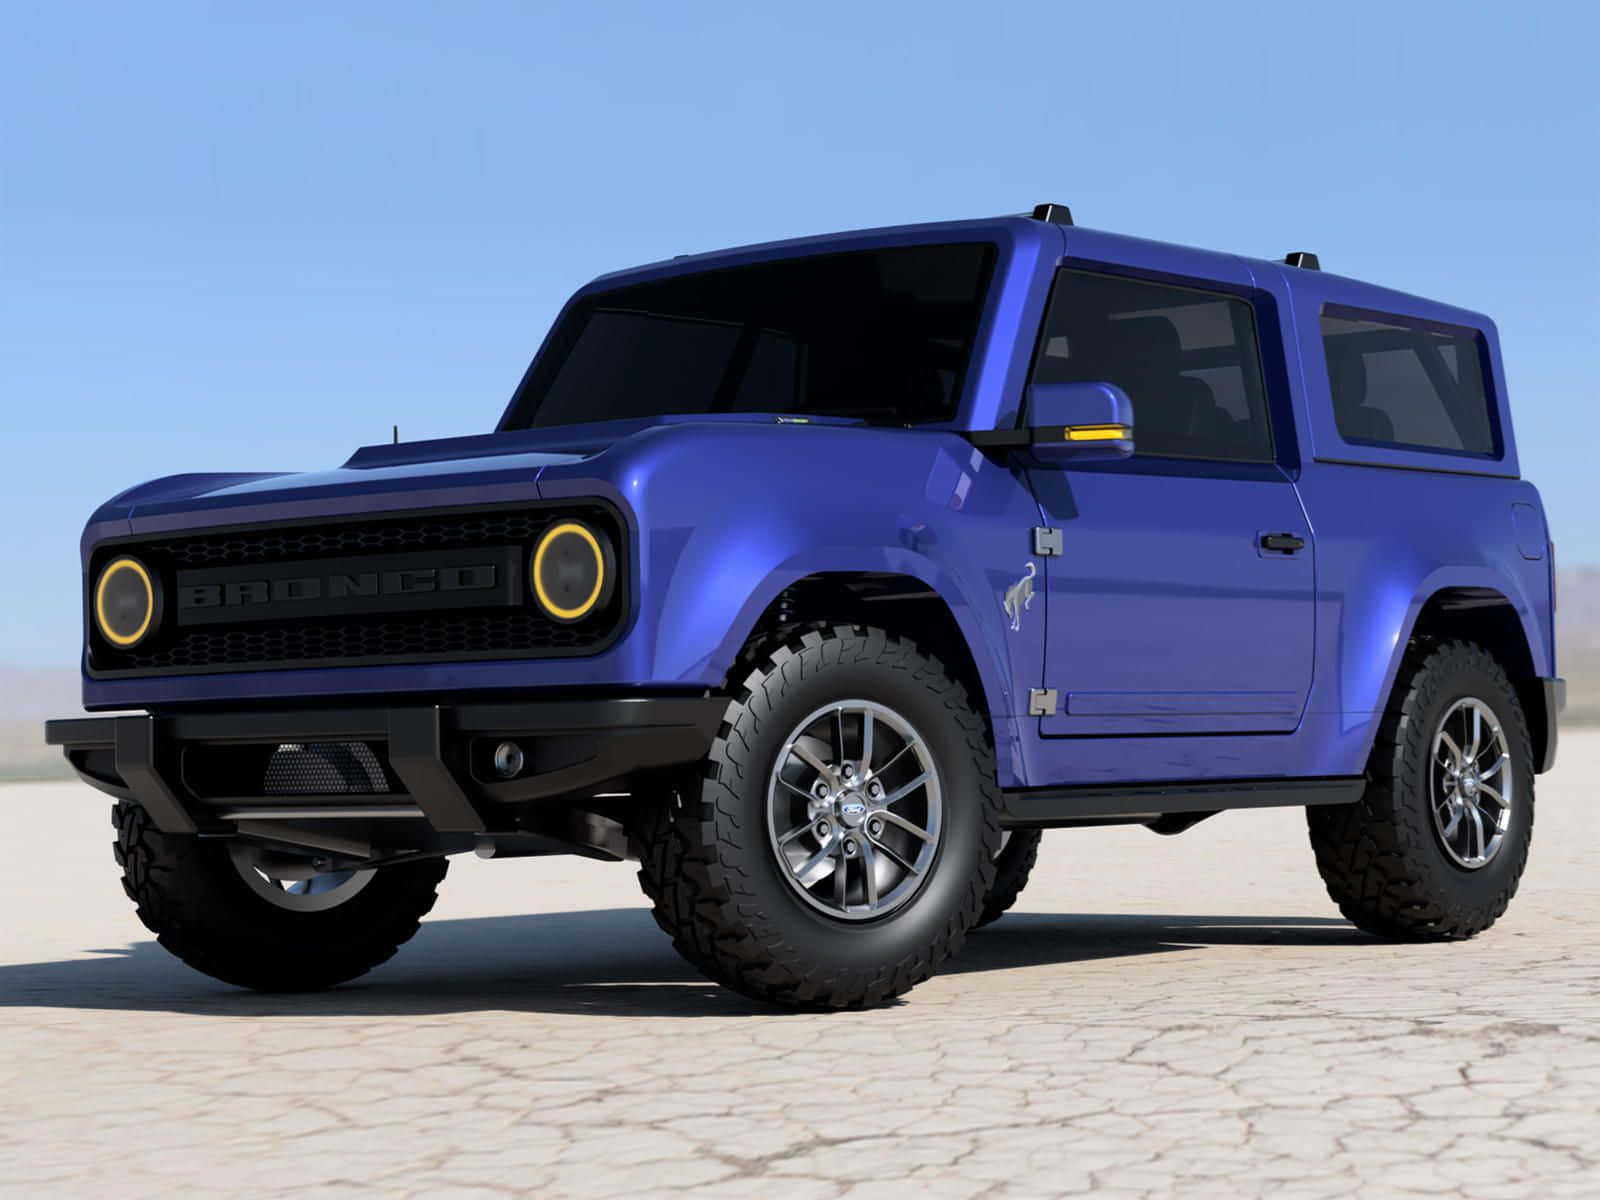 Get Ready for Adventure with the Unstoppable Ford Bronco